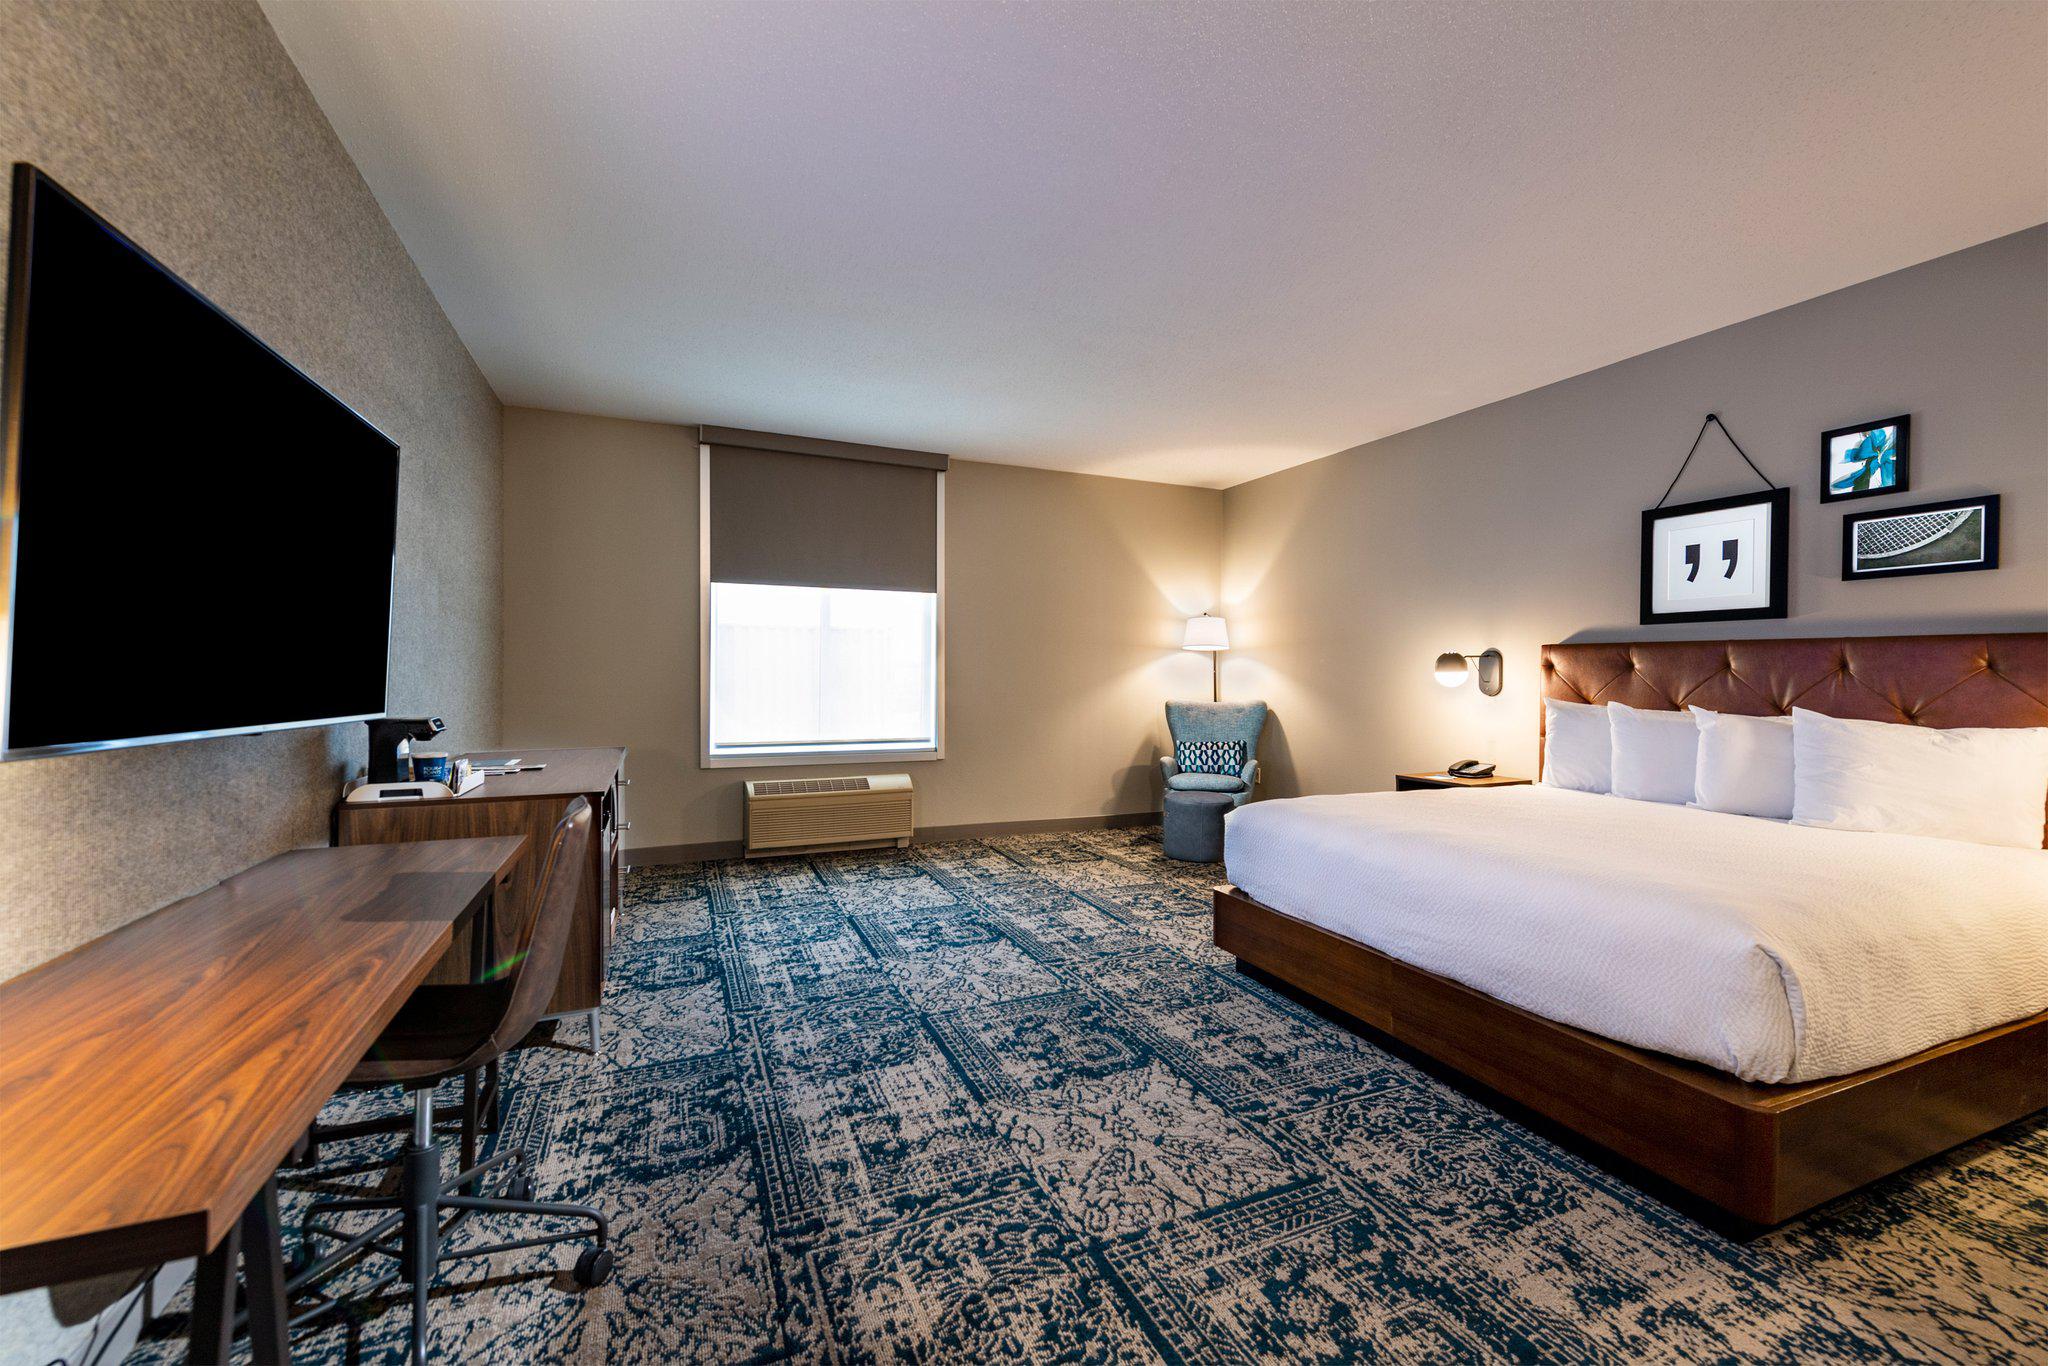 Four Points by Sheraton St. Louis - Fairview Heights Photo